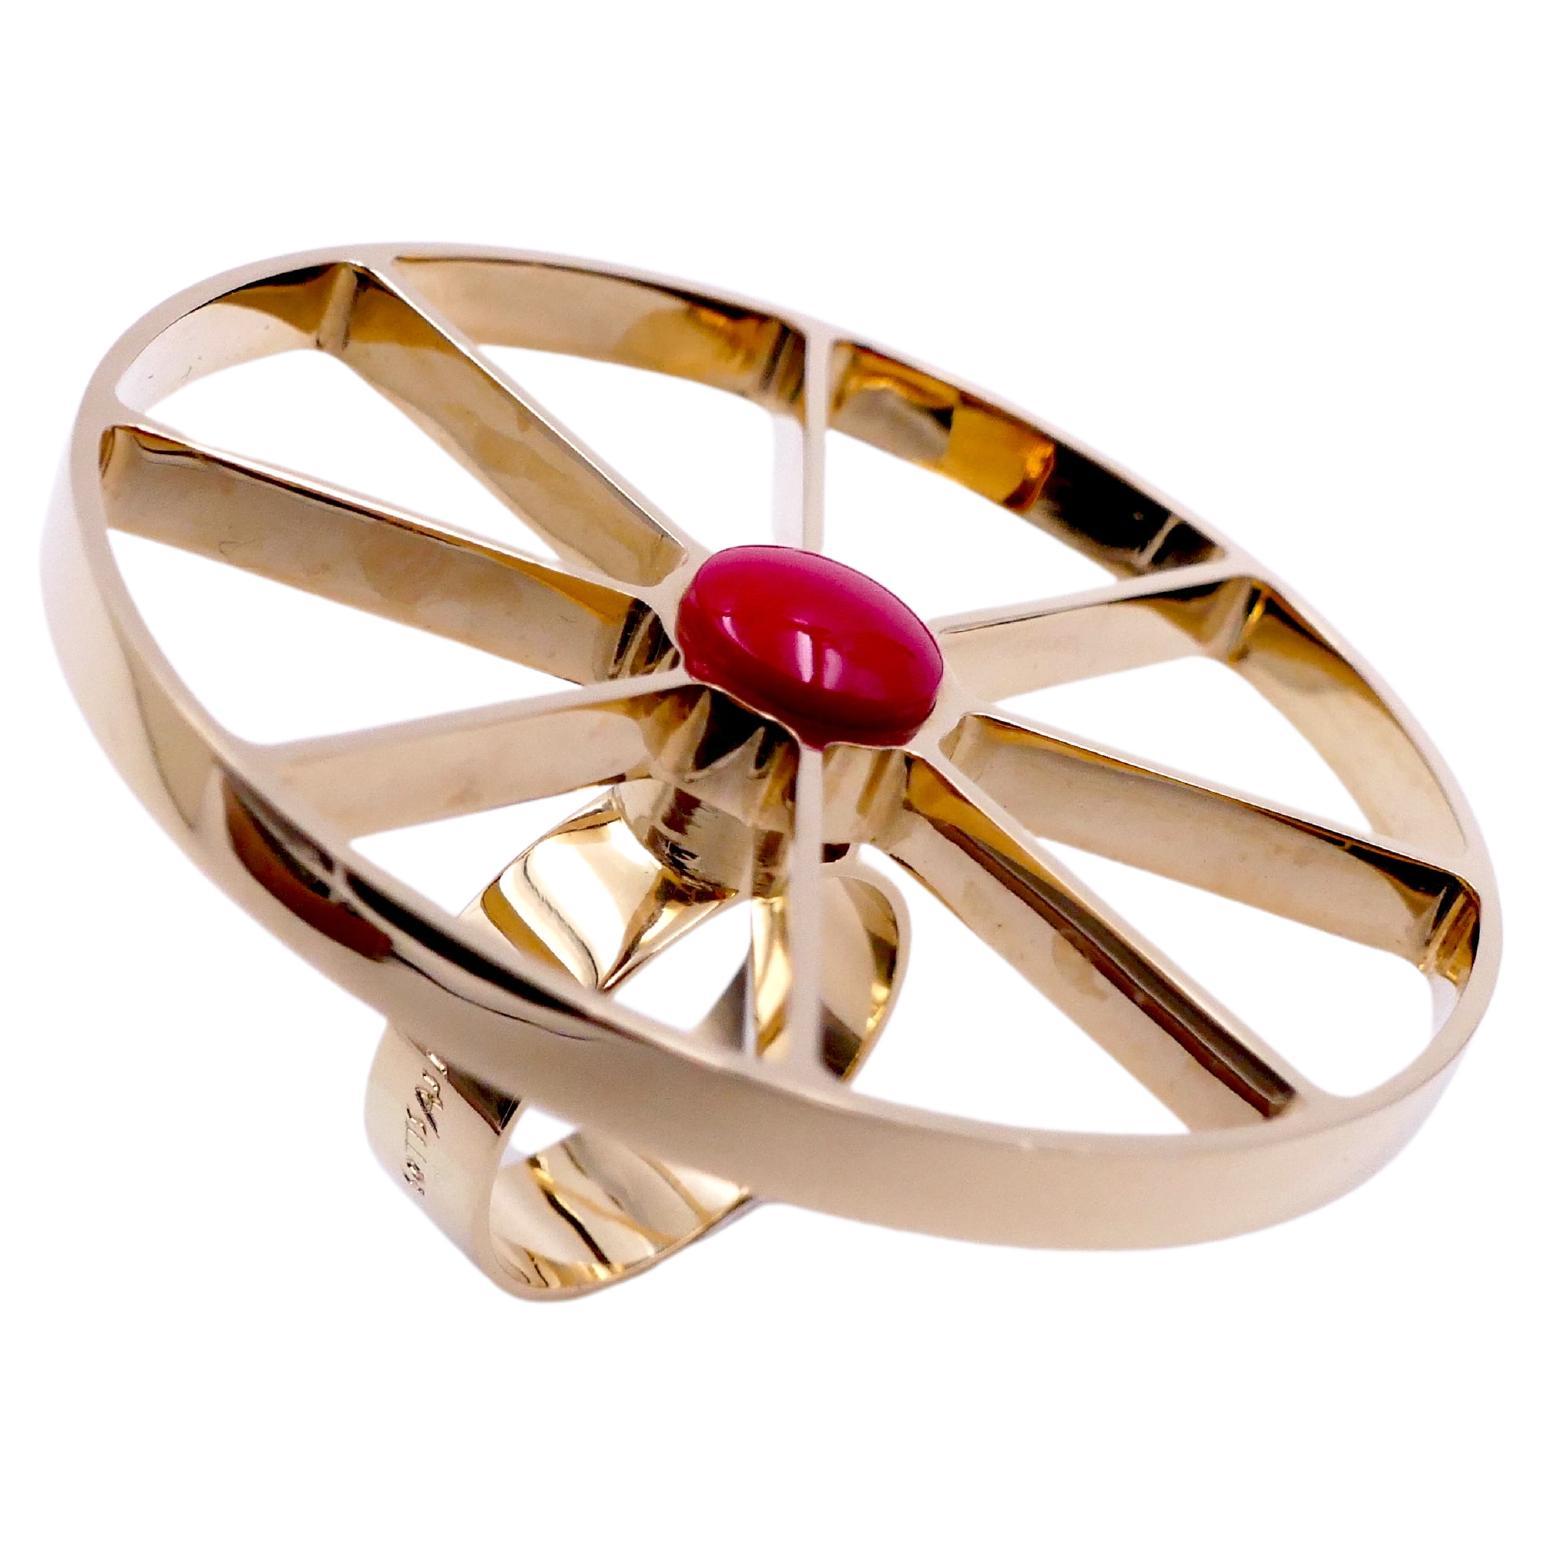 Ettore Sottsass "Ruota" 'Wheel' 18 Carat and Coral Ring, Limited Edition